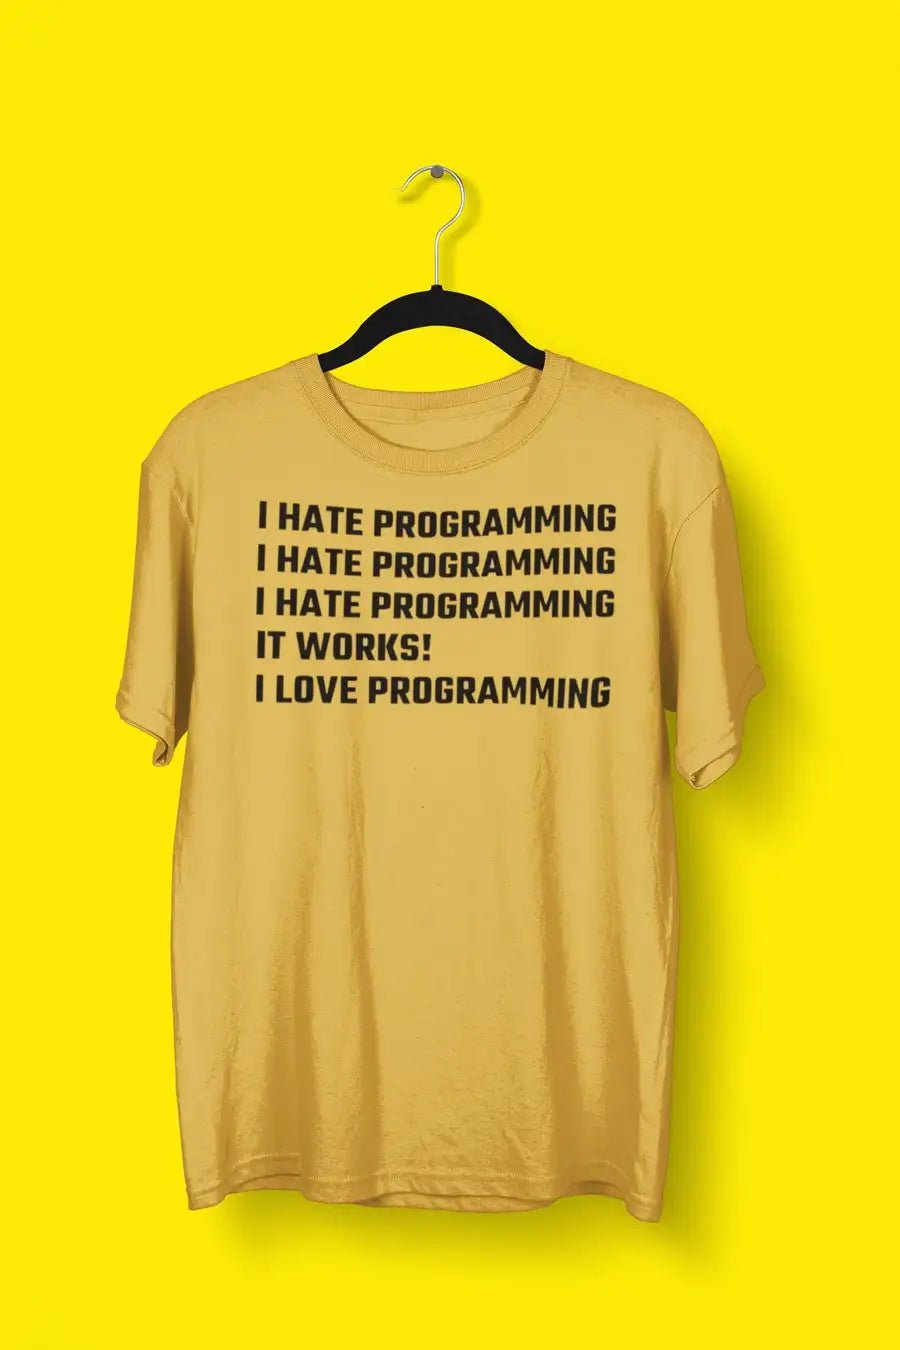 I Hate Programming / I Love Programming Coding T Shirts | Premium Design | Catch My Drift India - Catch My Drift India Clothing black, clothing, coding, engineer, engineering, made in india, 